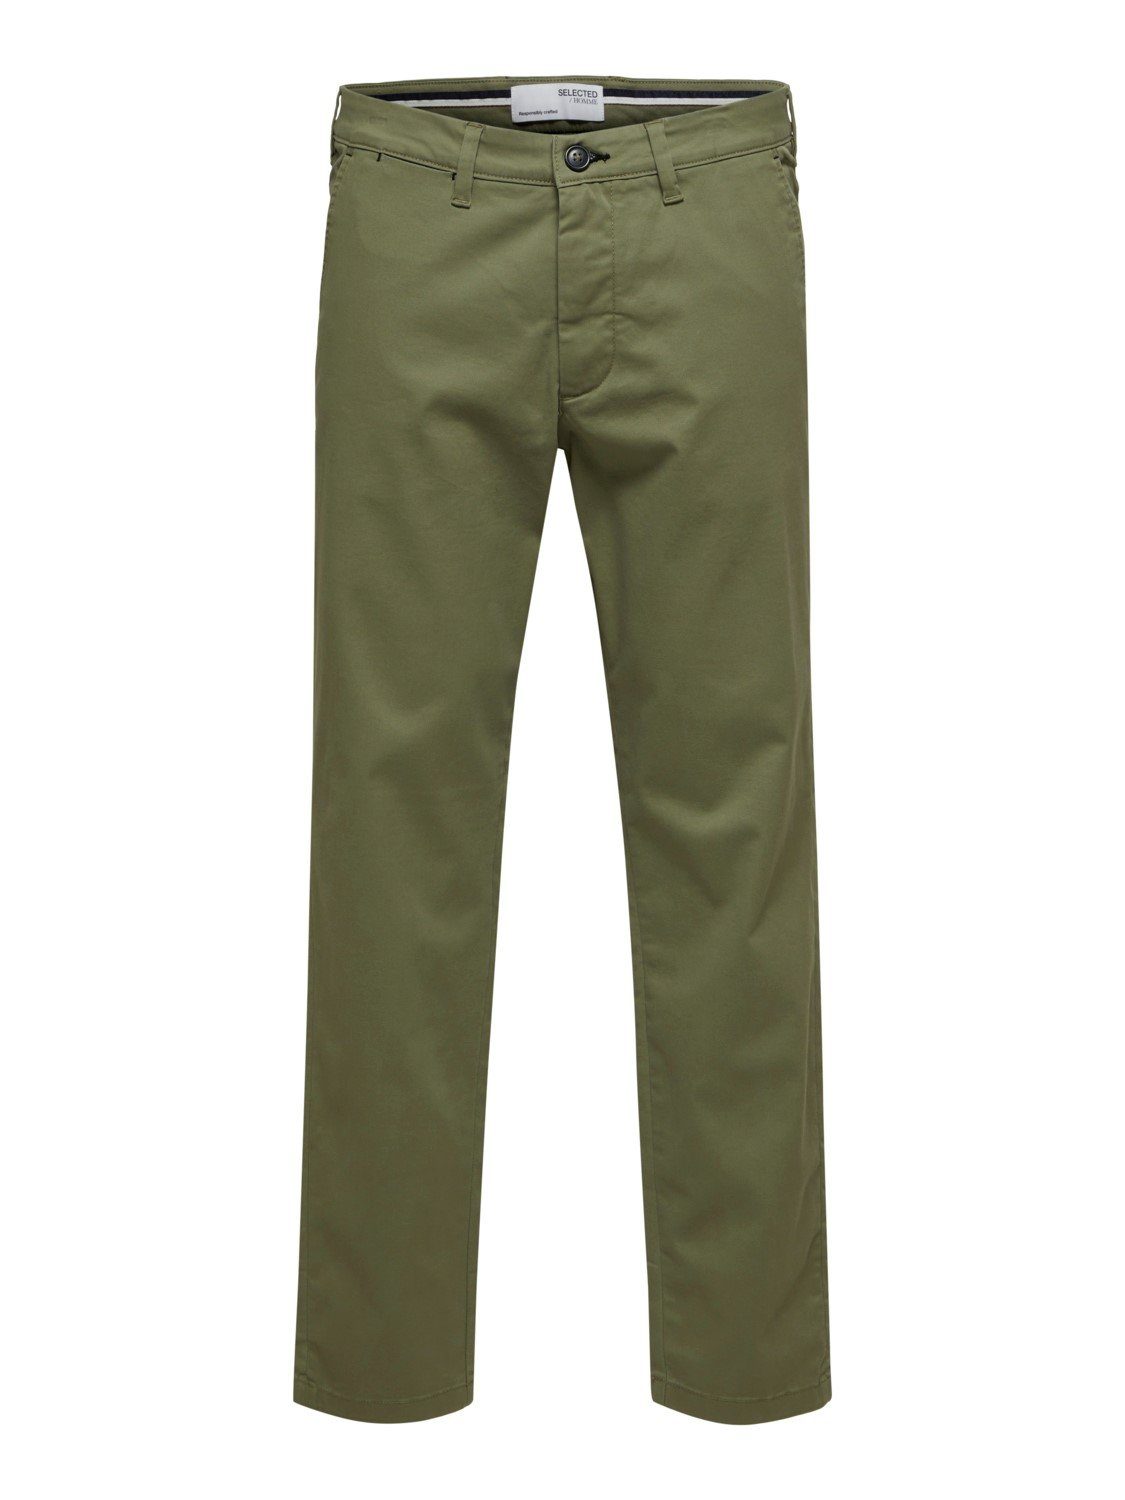 mit Lichen SELECTED Green Stretch 16074054 FLEX Deep MILES HOMME Chinohose